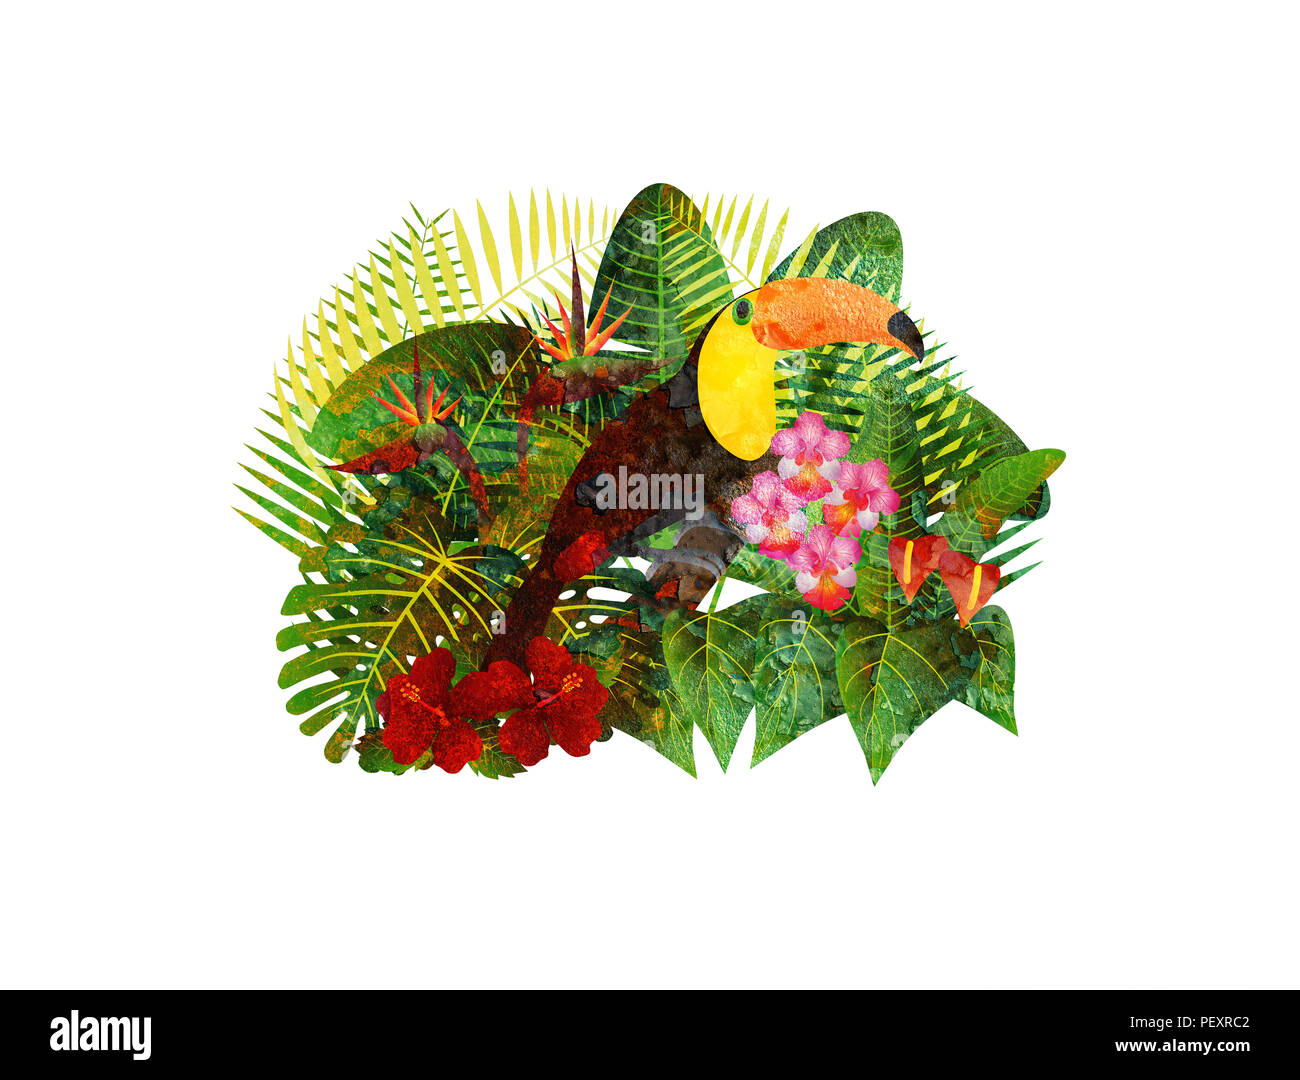 Tropical Rain Forest  Jungle Plants with Leaves Flowers and Toucan Bird Grunge Texture Isolated on White Background Color Illustration Stock Photo